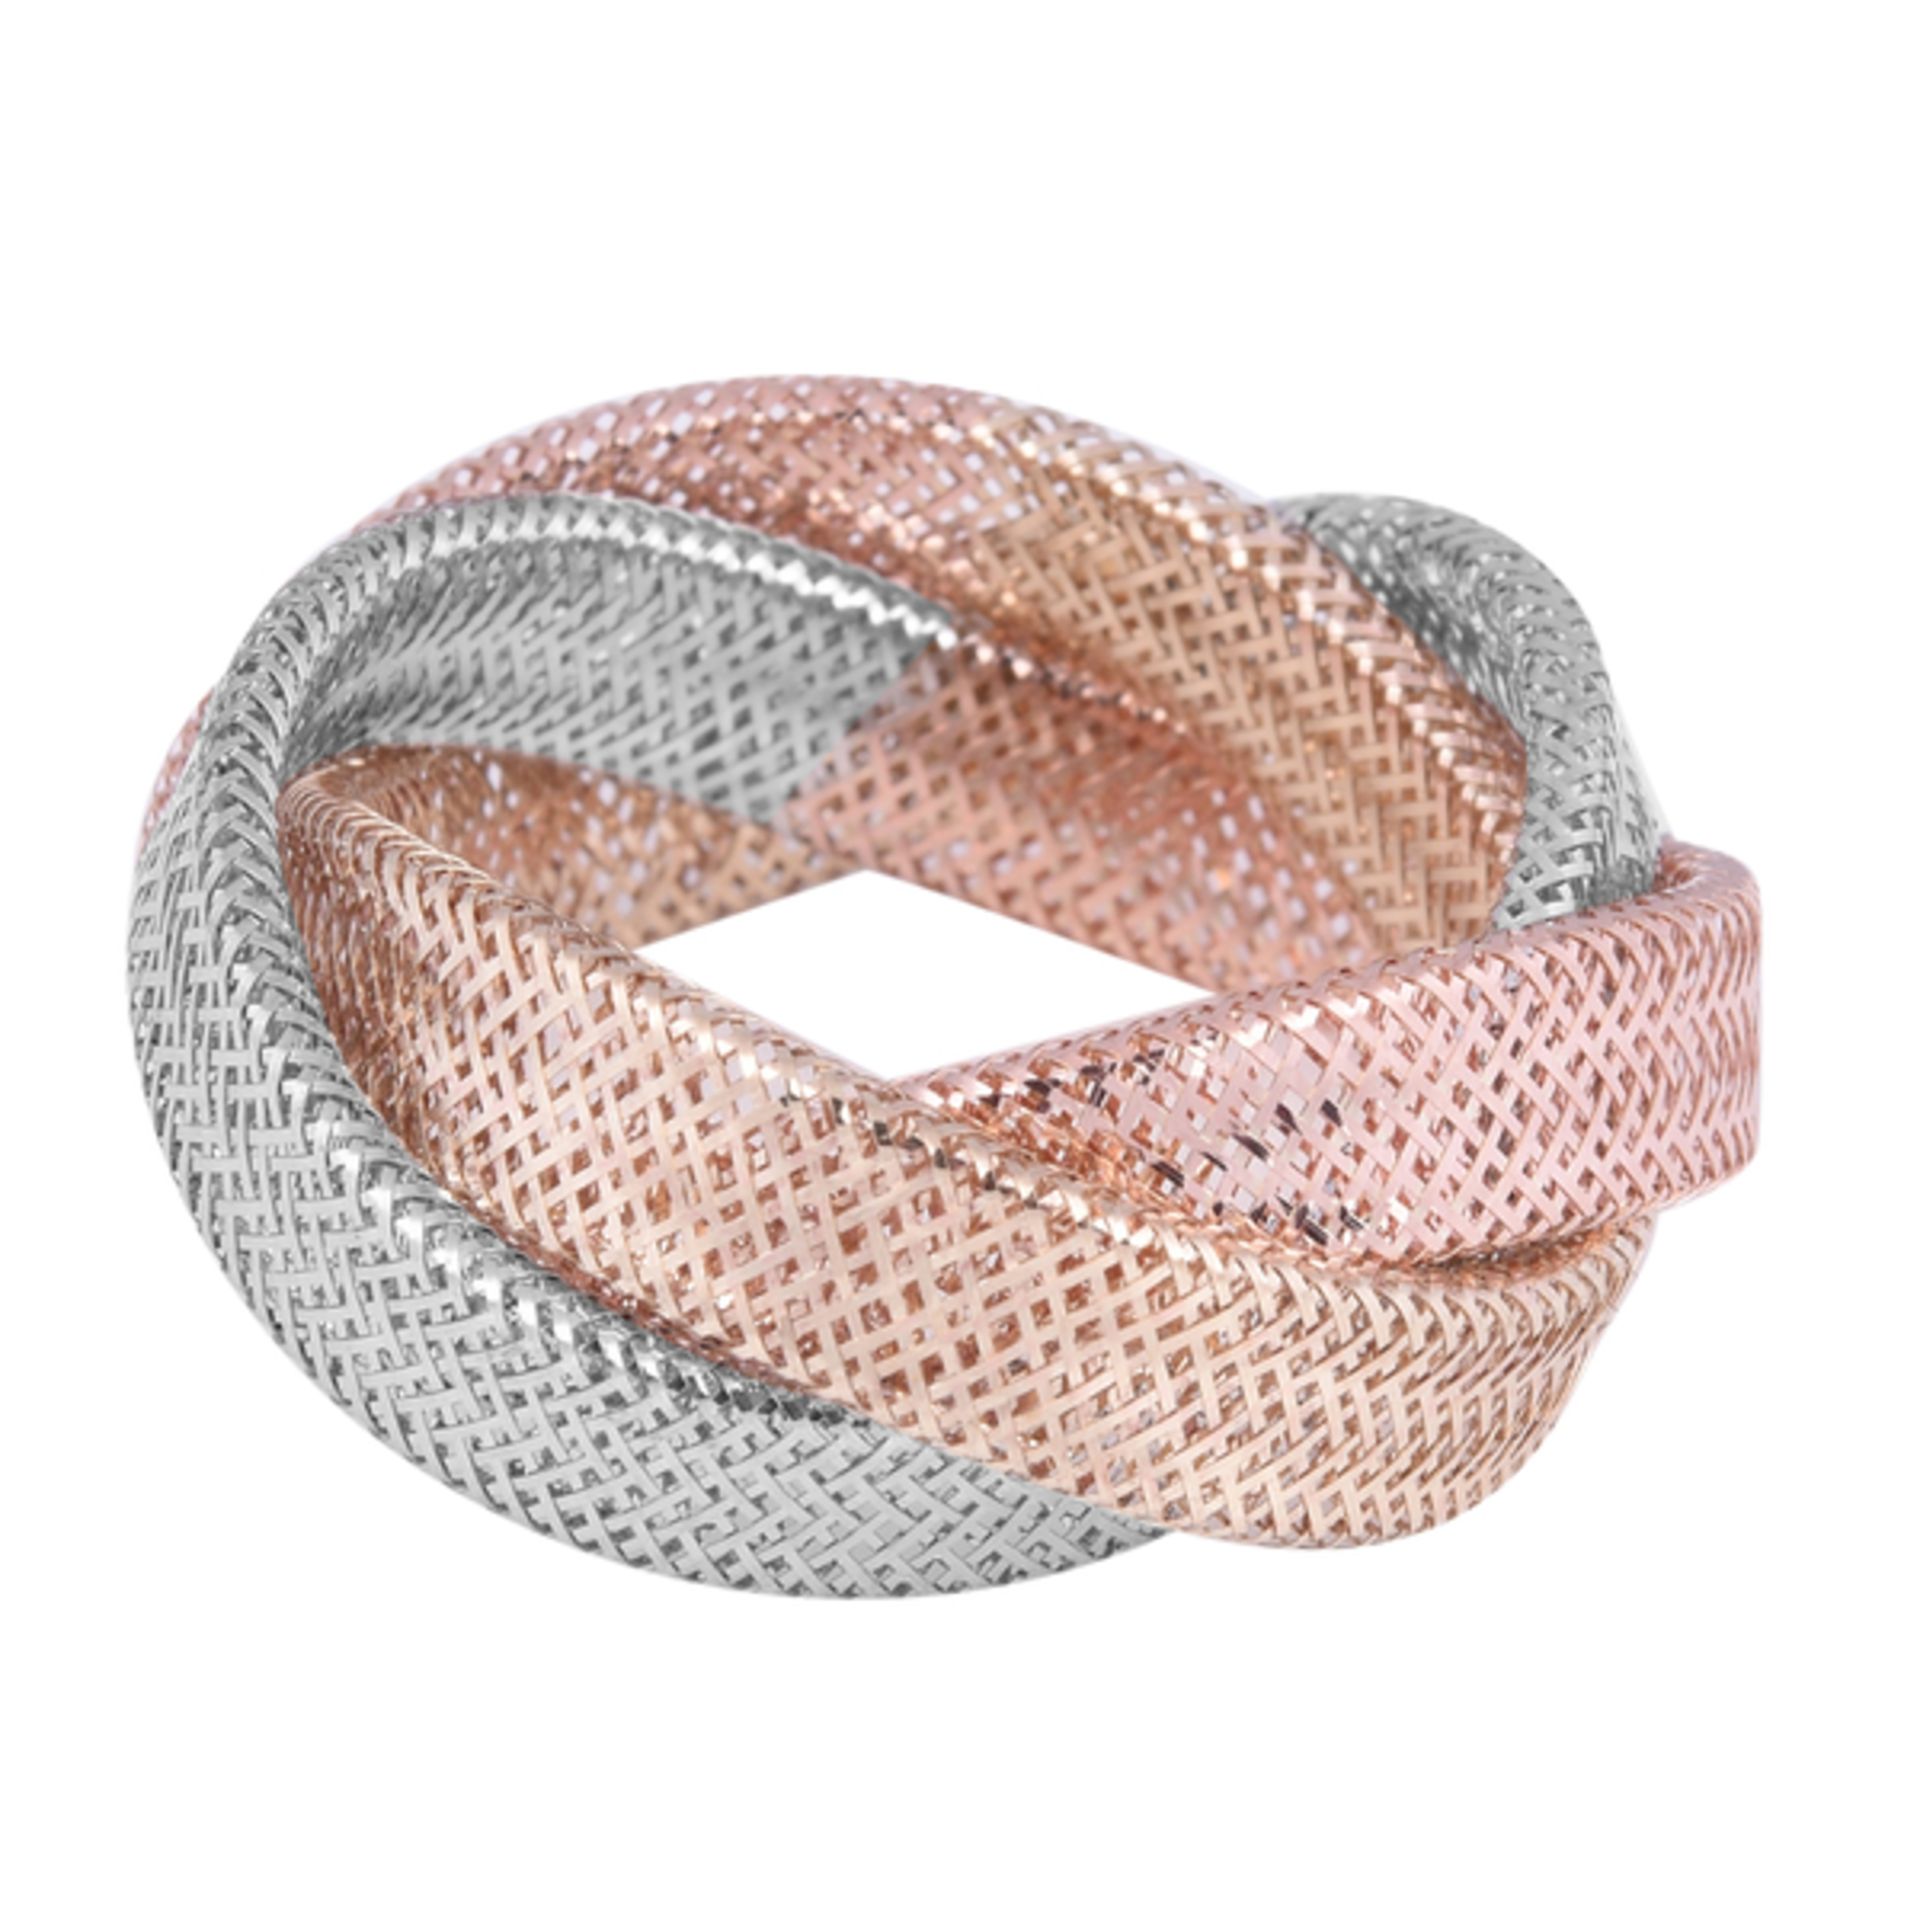 New! Maestro Collection - 9K Tricolour Gold Stretchable Mesh Ring - Image 5 of 5